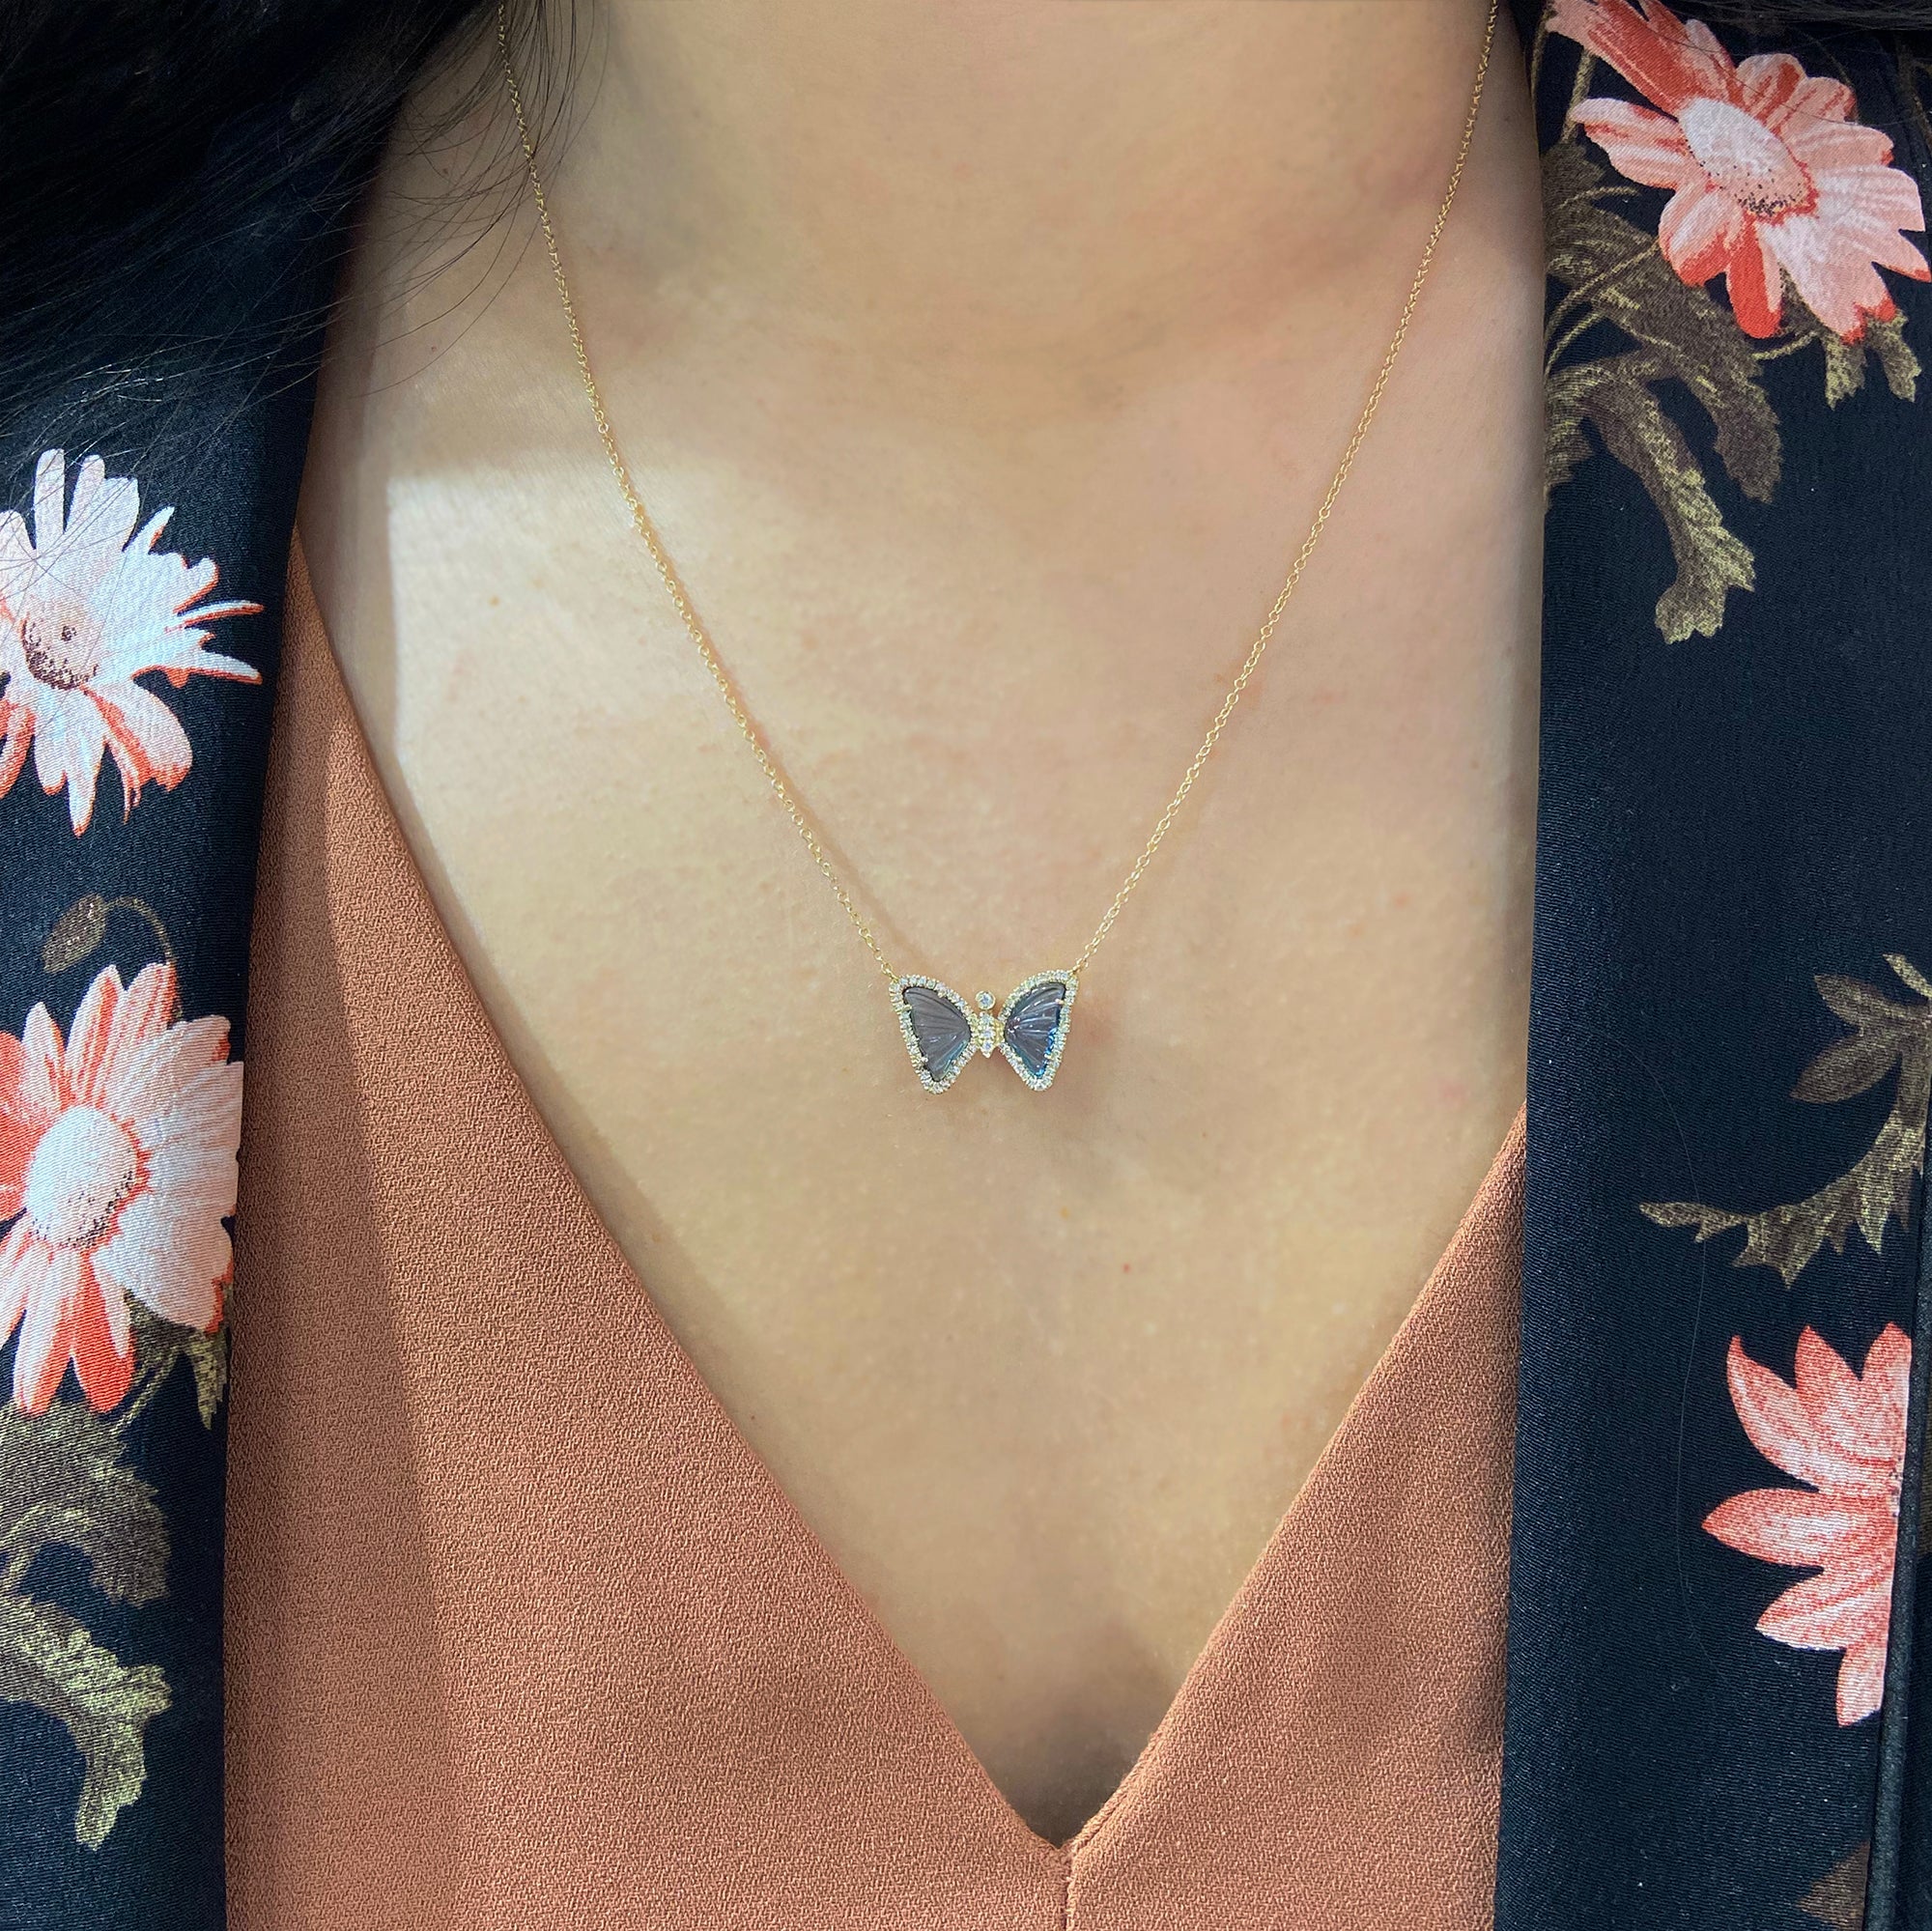 mini butterfly necklace with diamonds in london blue topaz